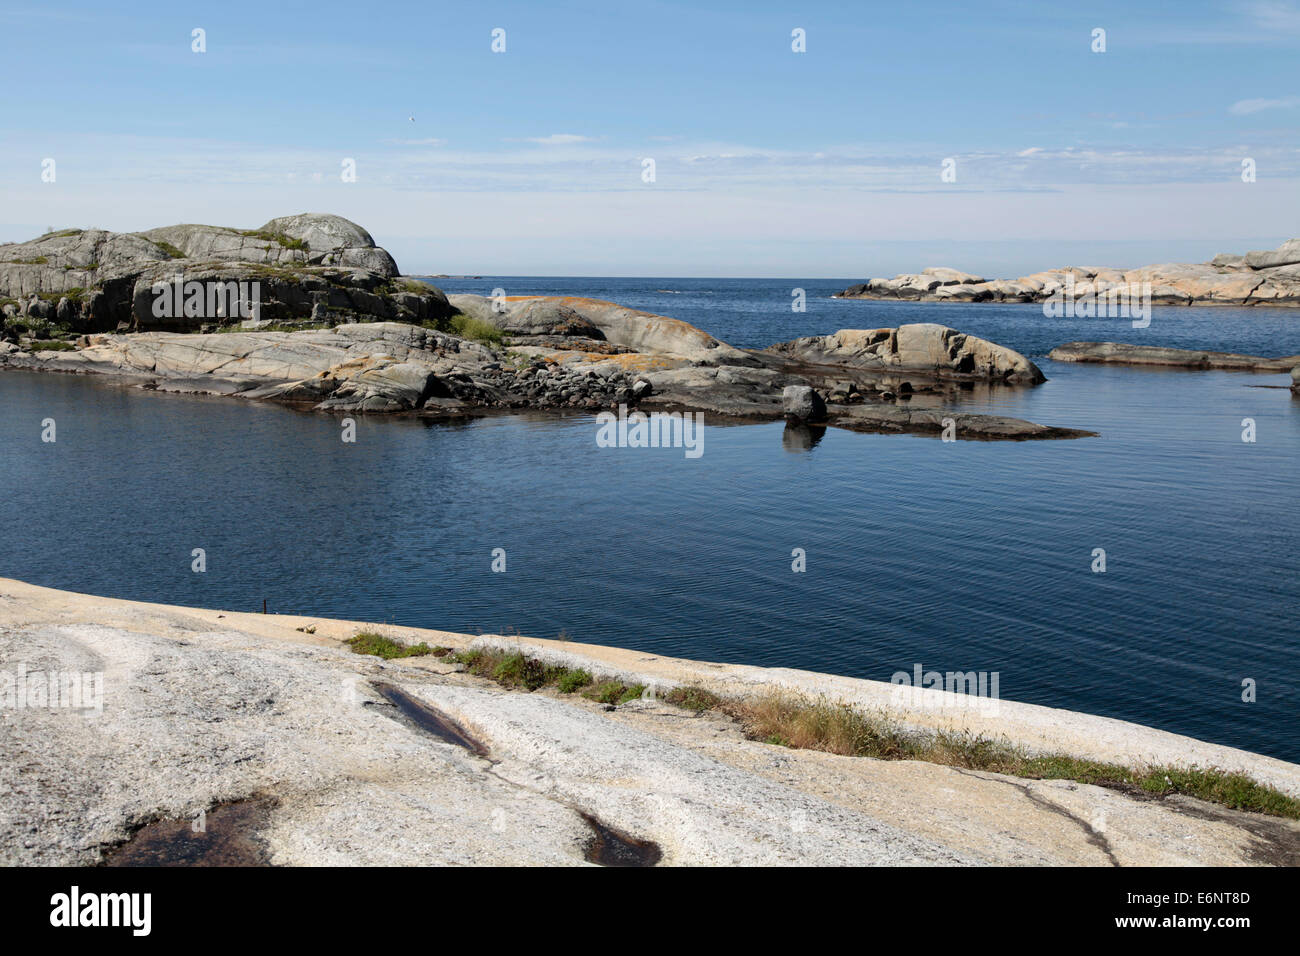 The skerries at Verdens Ende are numerous and a magic of nature. The Norwegian end of the world - or 'Verdens Ende' - is located in the Oslo fjord. Photo: Klaus Nowottnick Date: June 6, 2014 Stock Photo